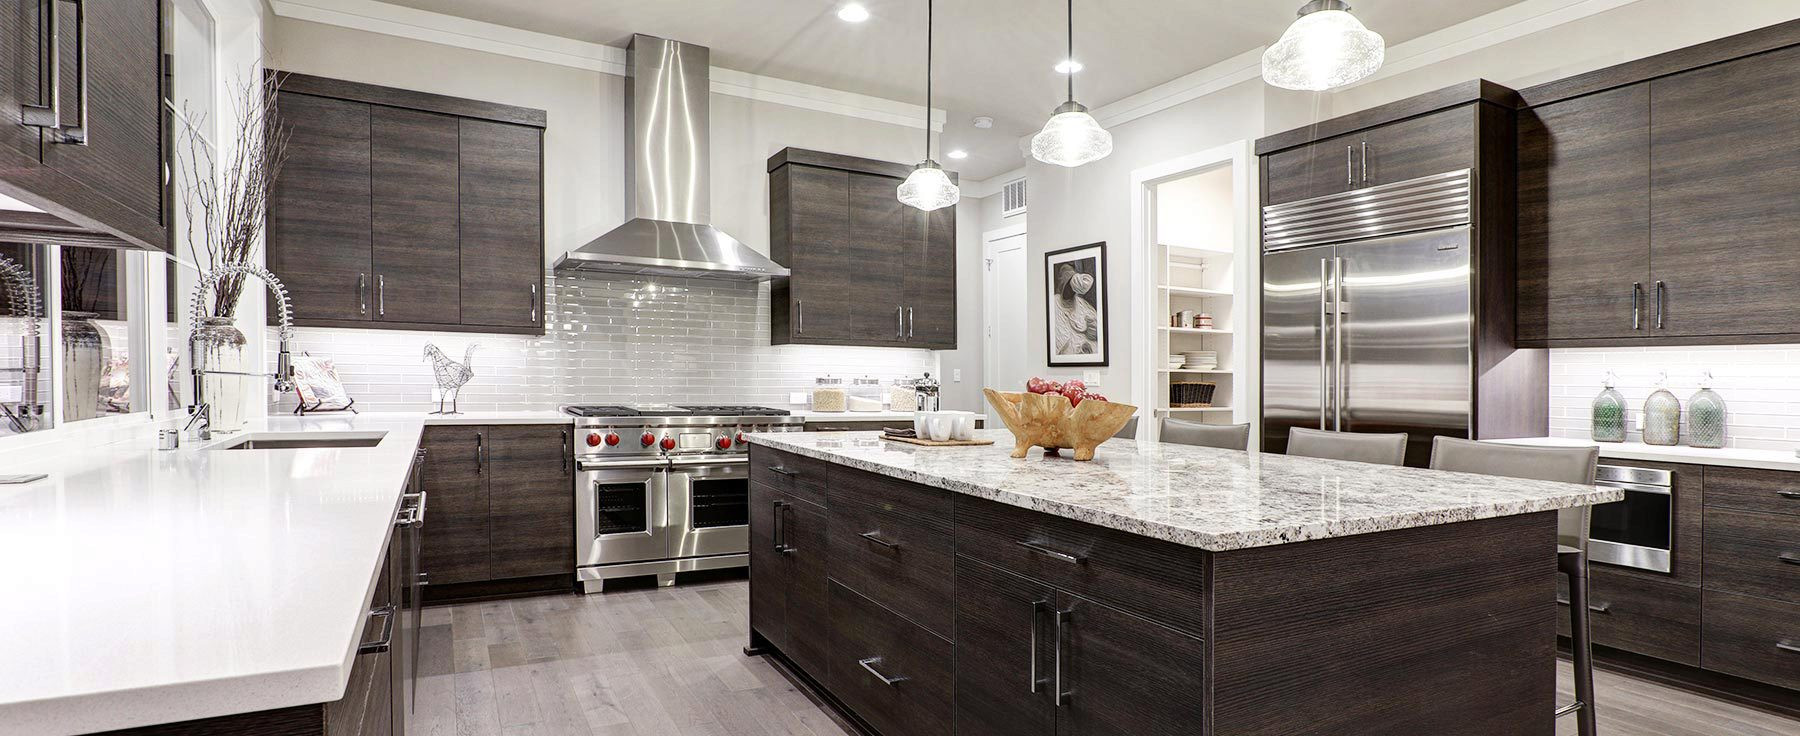 Remodel Kitchen Cost
 Remodeling Your Kitchen Learn These Secrets Before Jumping In